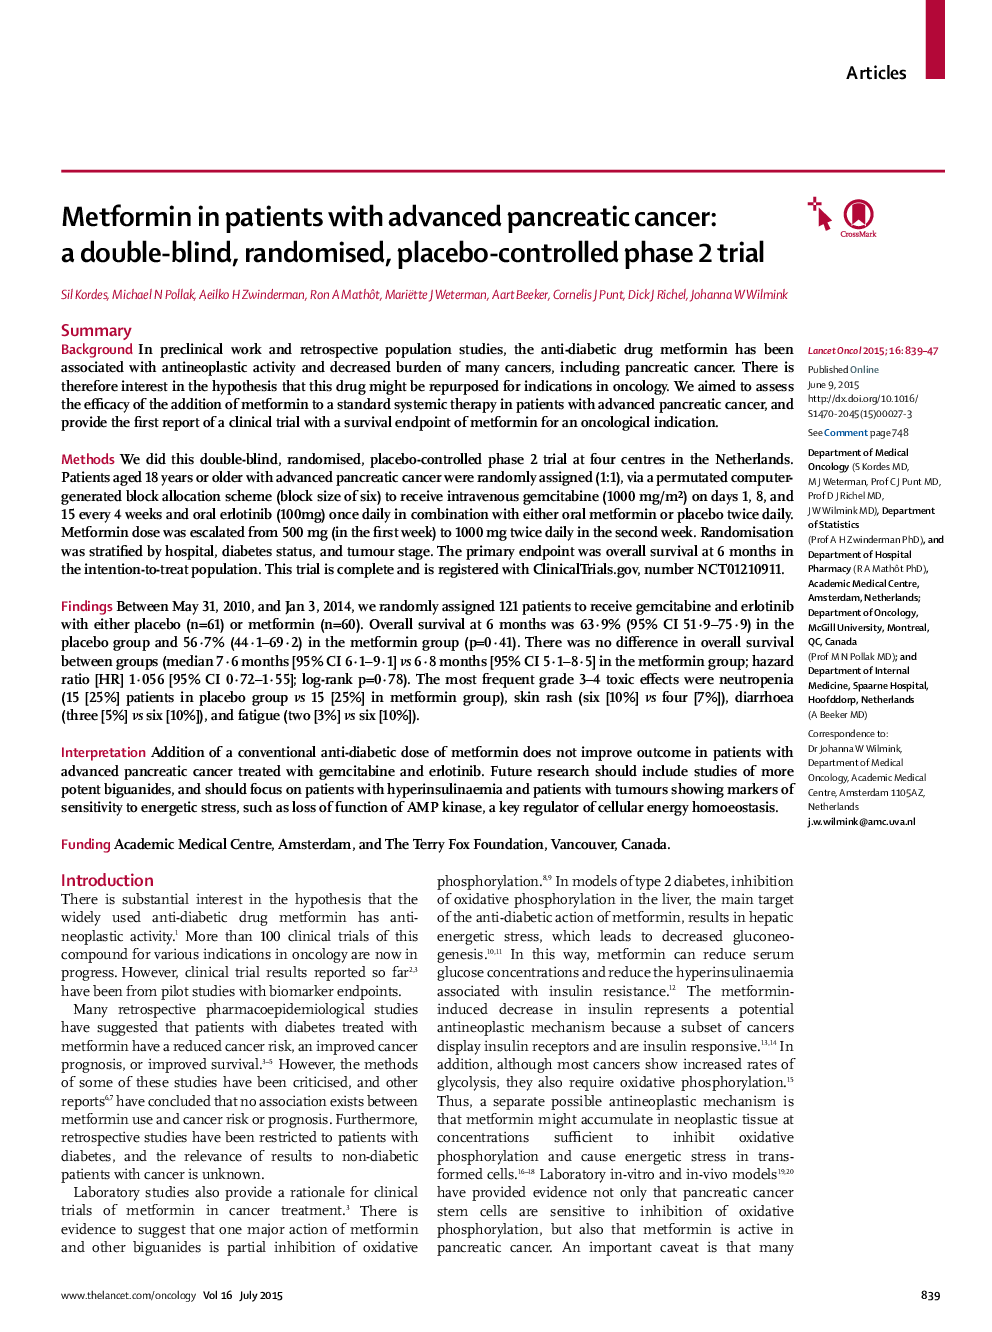 Metformin in patients with advanced pancreatic cancer: a double-blind, randomised, placebo-controlled phase 2 trial